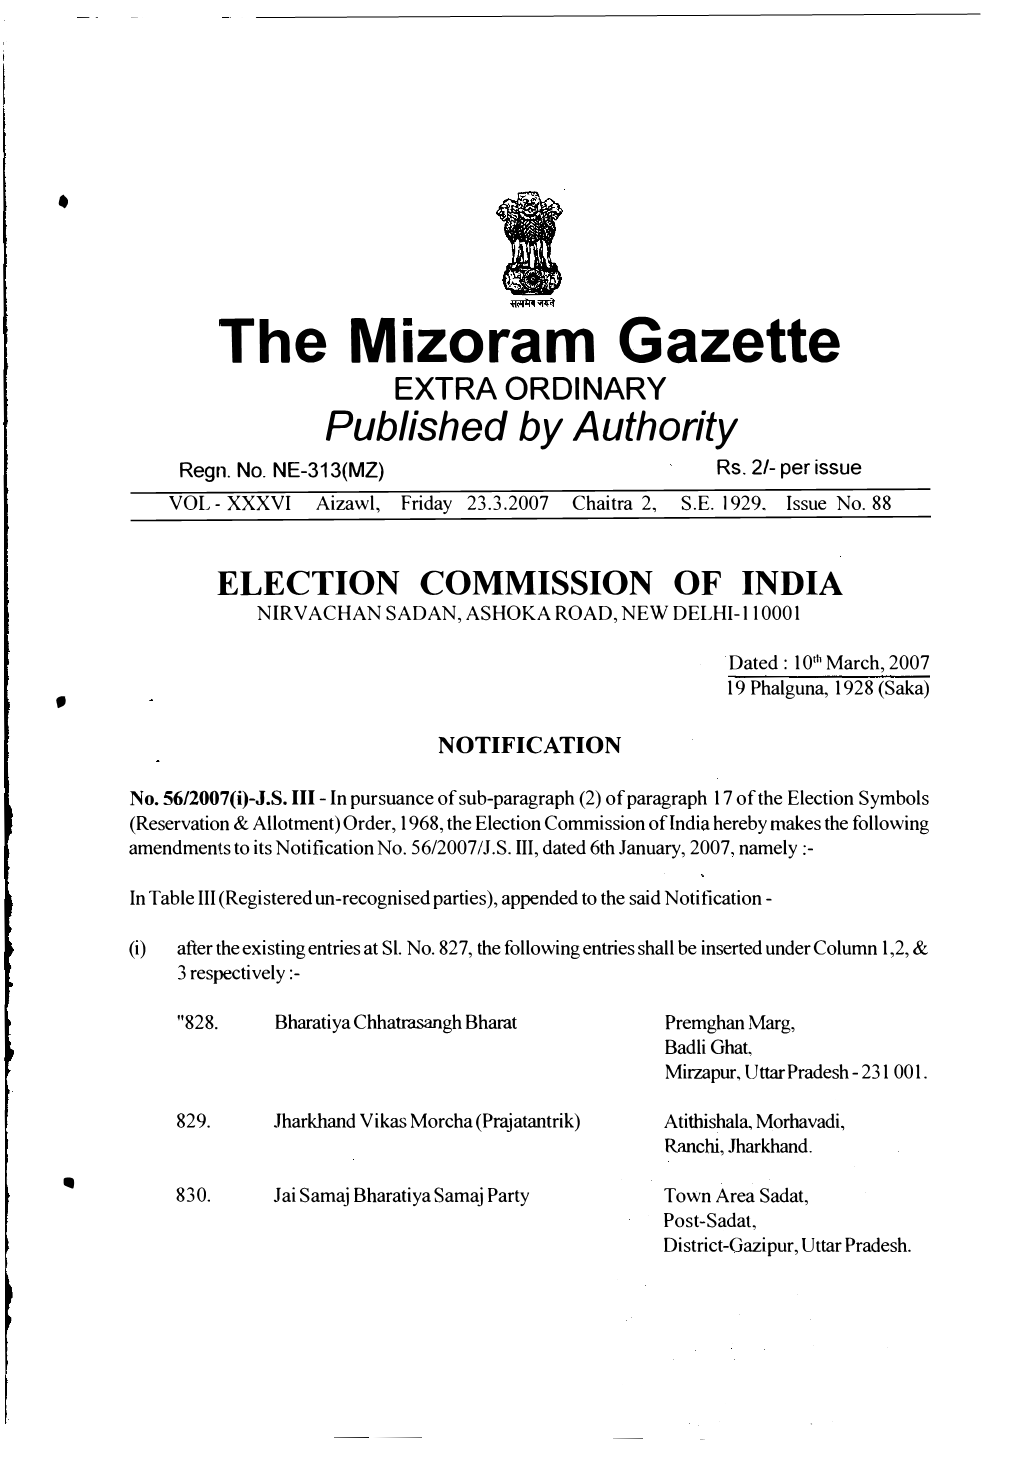 The Mizoram Gazette EXTRA ORDINARY Published by Authority Regn